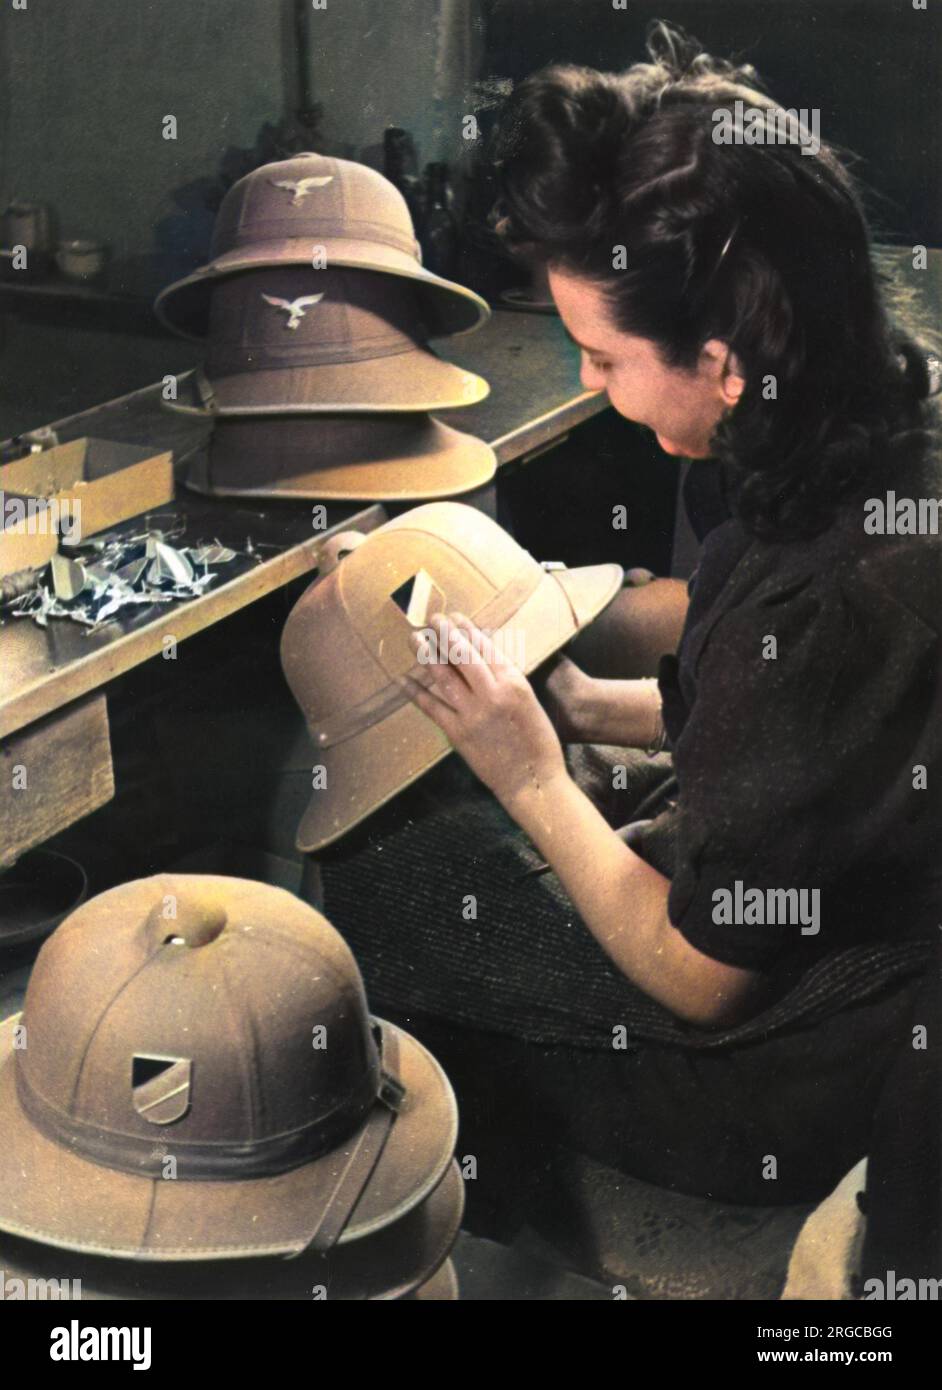 Making Type I pith helmets for the German Afrika Korps - WWII. Sticking ...